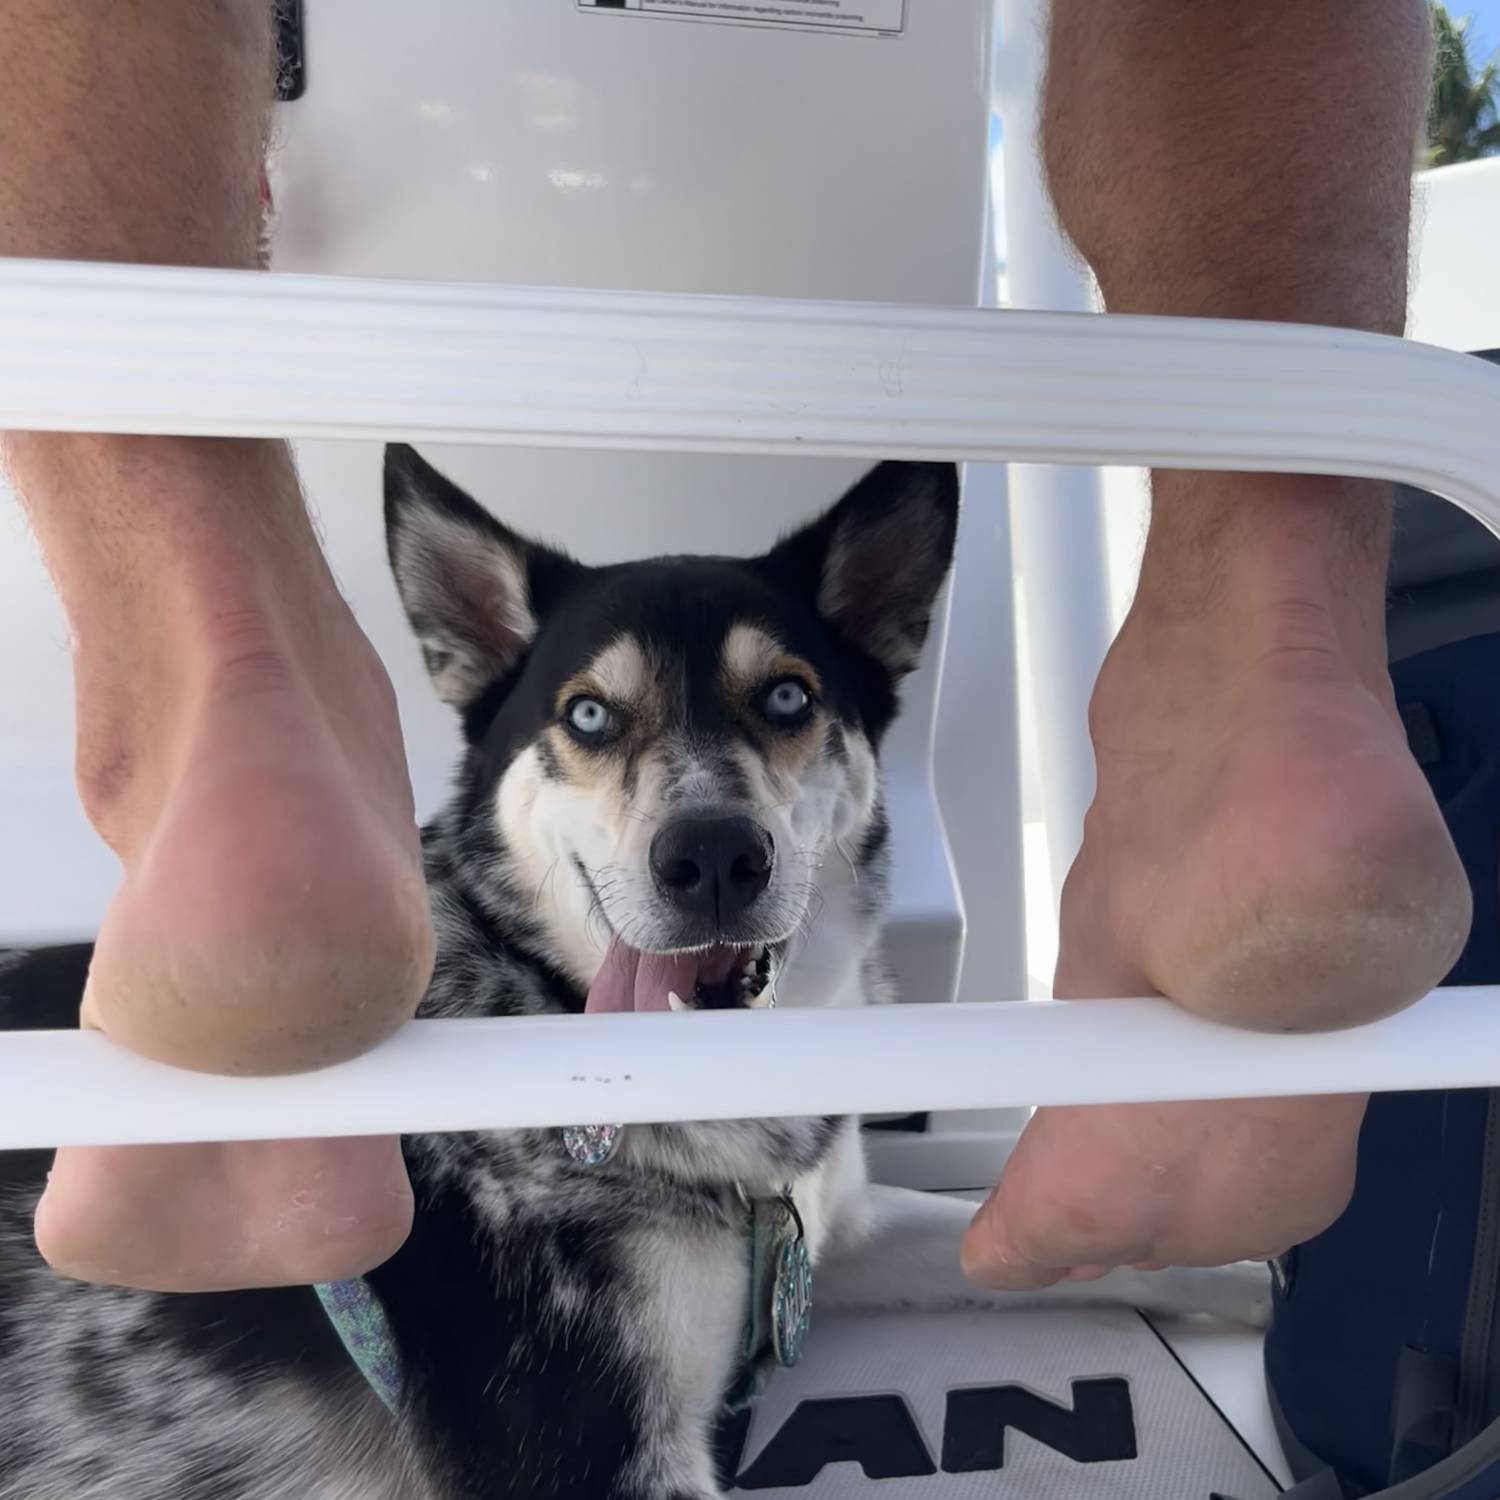 Title: Atlas the husky loves boating - On board their Sportsman Heritage 231 Center Console - Location: Boca Raton. Participating in the Photo Contest #SportsmanSeptember